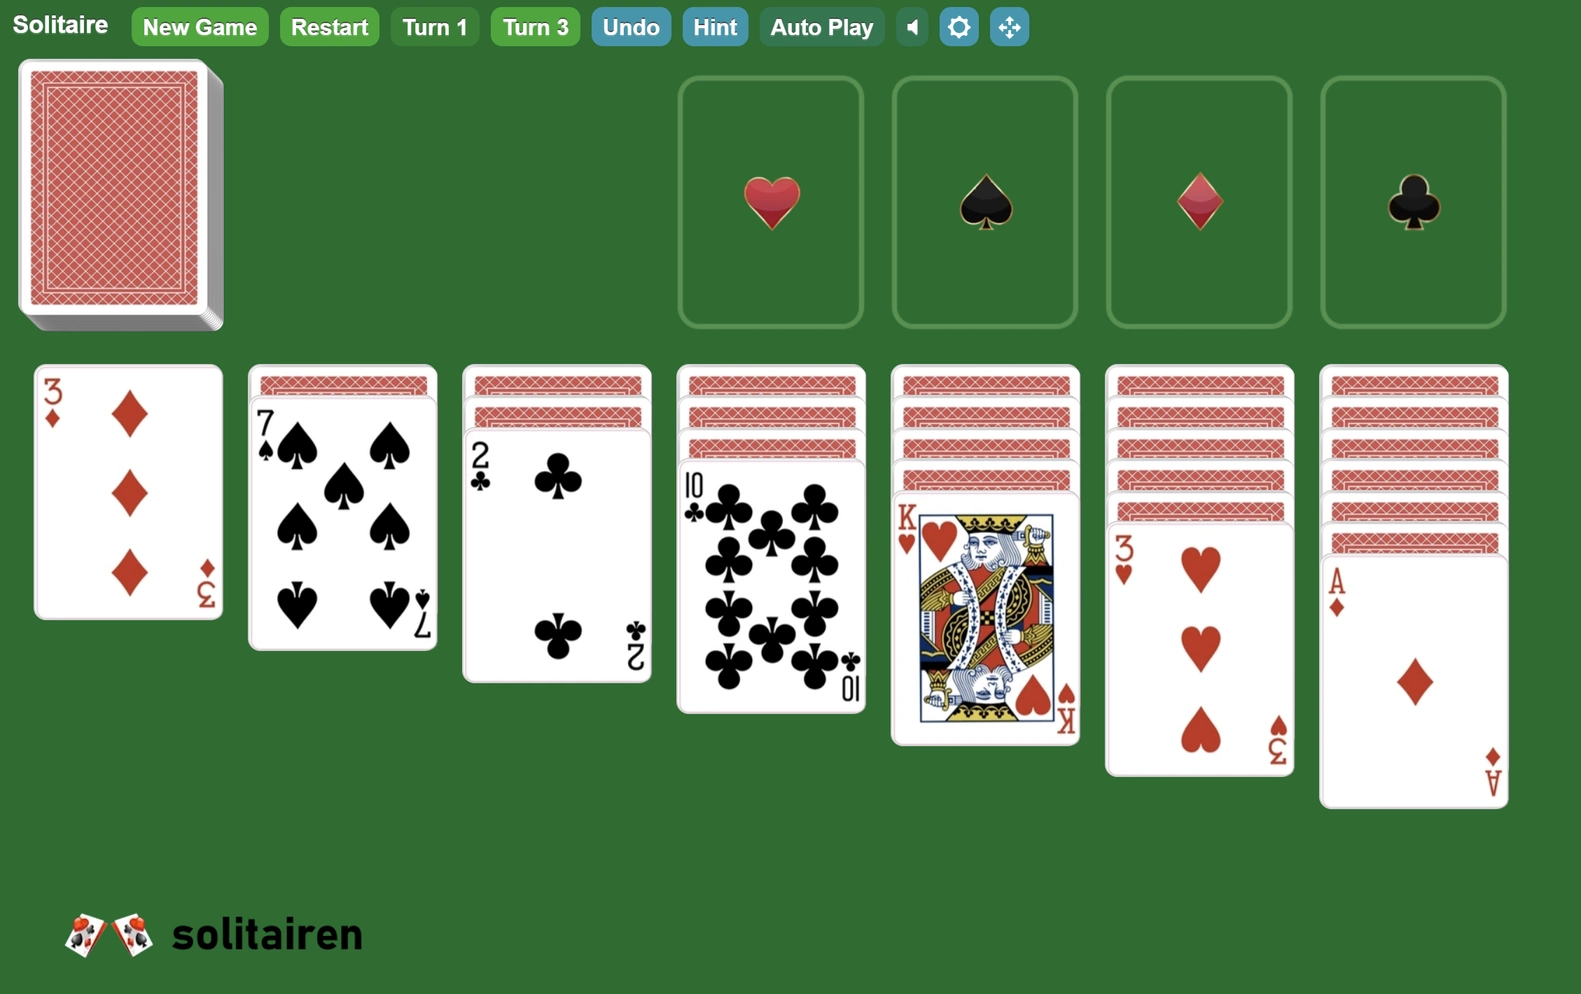 Solitaire Free Online: The Timeless Classic in the Digital Age